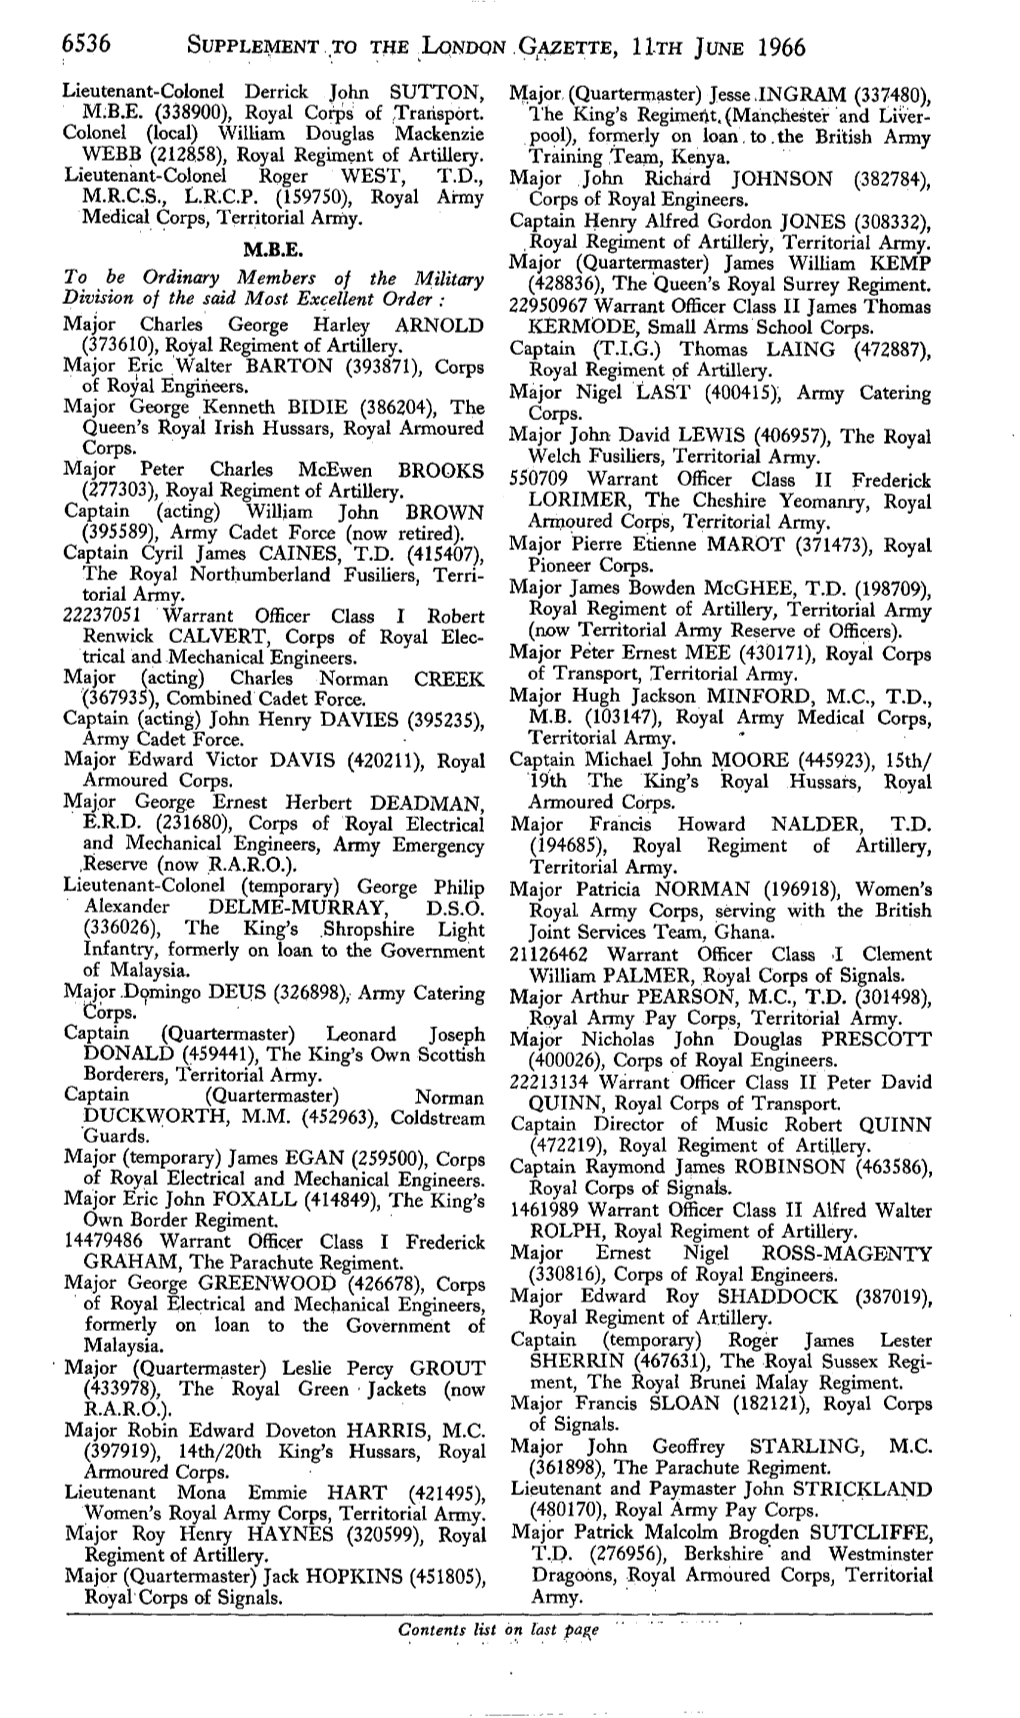 6536 Supplement to the Ivqndqn Gazette, H.Th June 1966